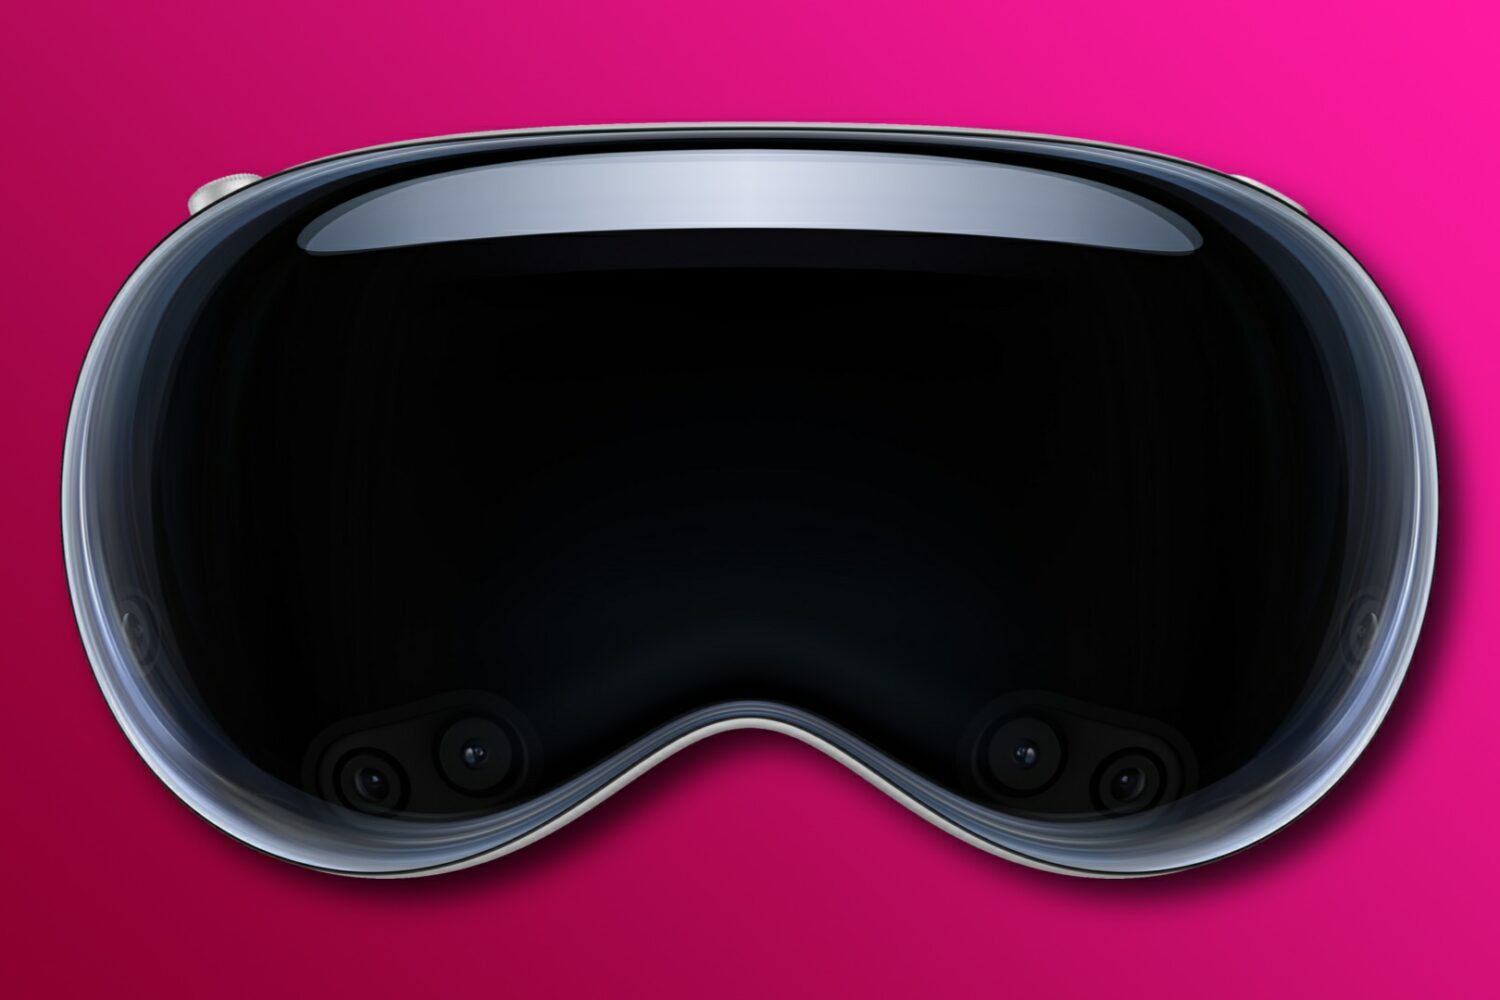 The front glass on Apple's Vision Pro headset